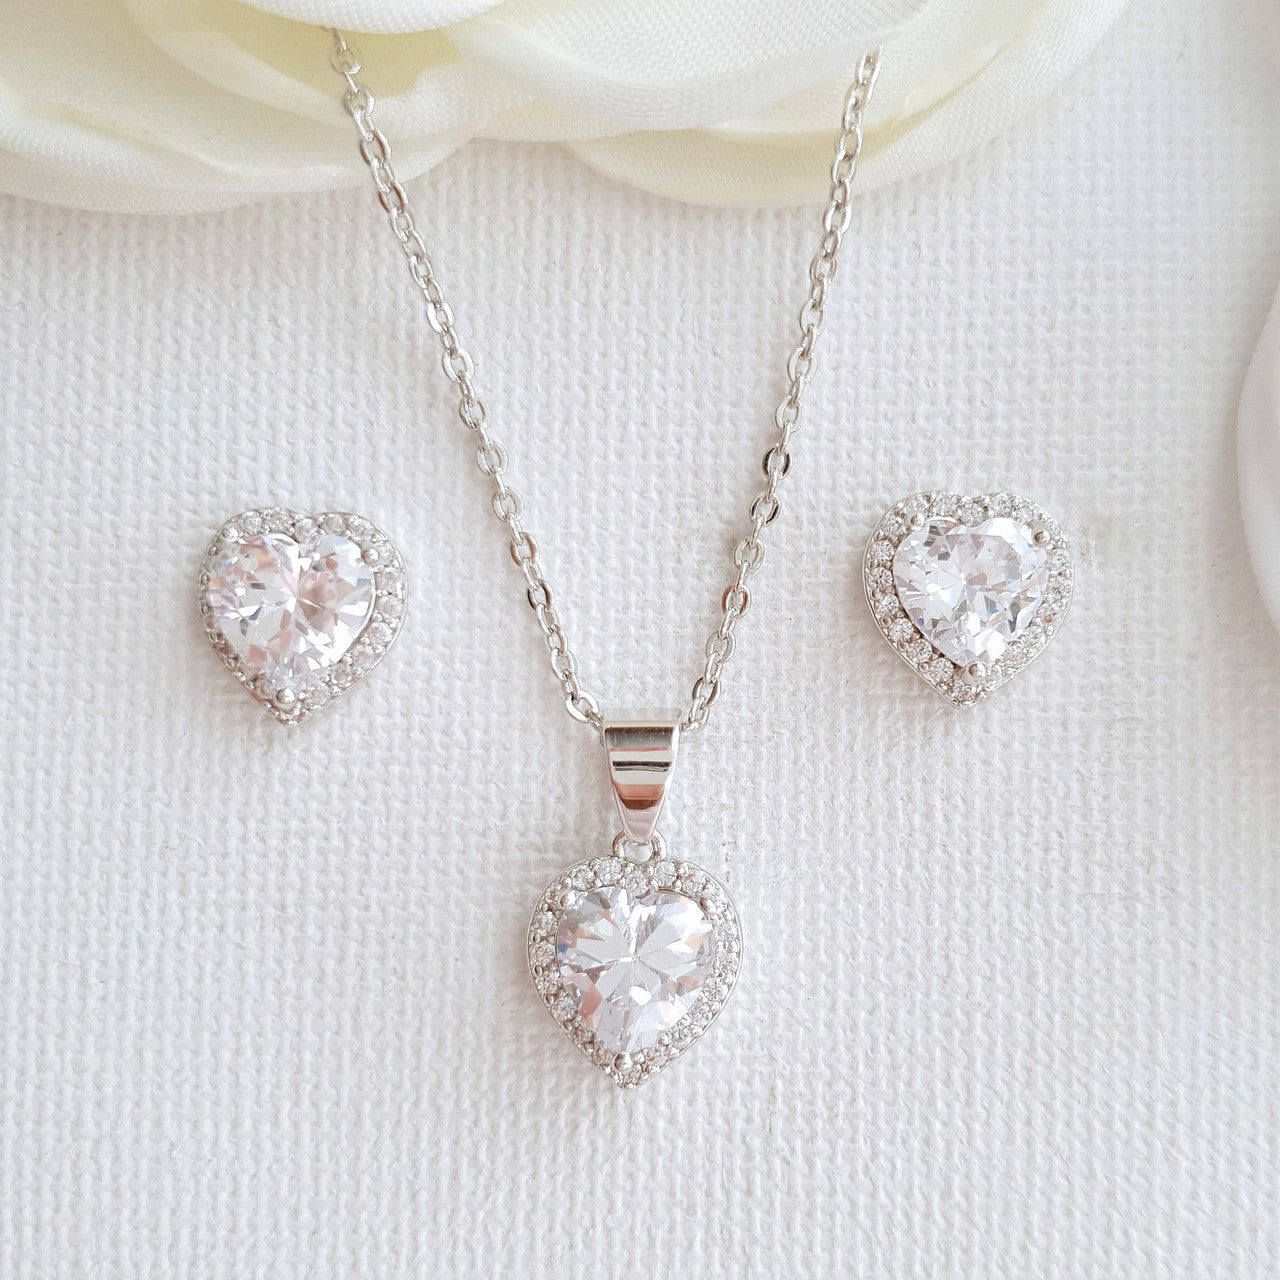 Gift a Heart Pendant Necklace- Diana